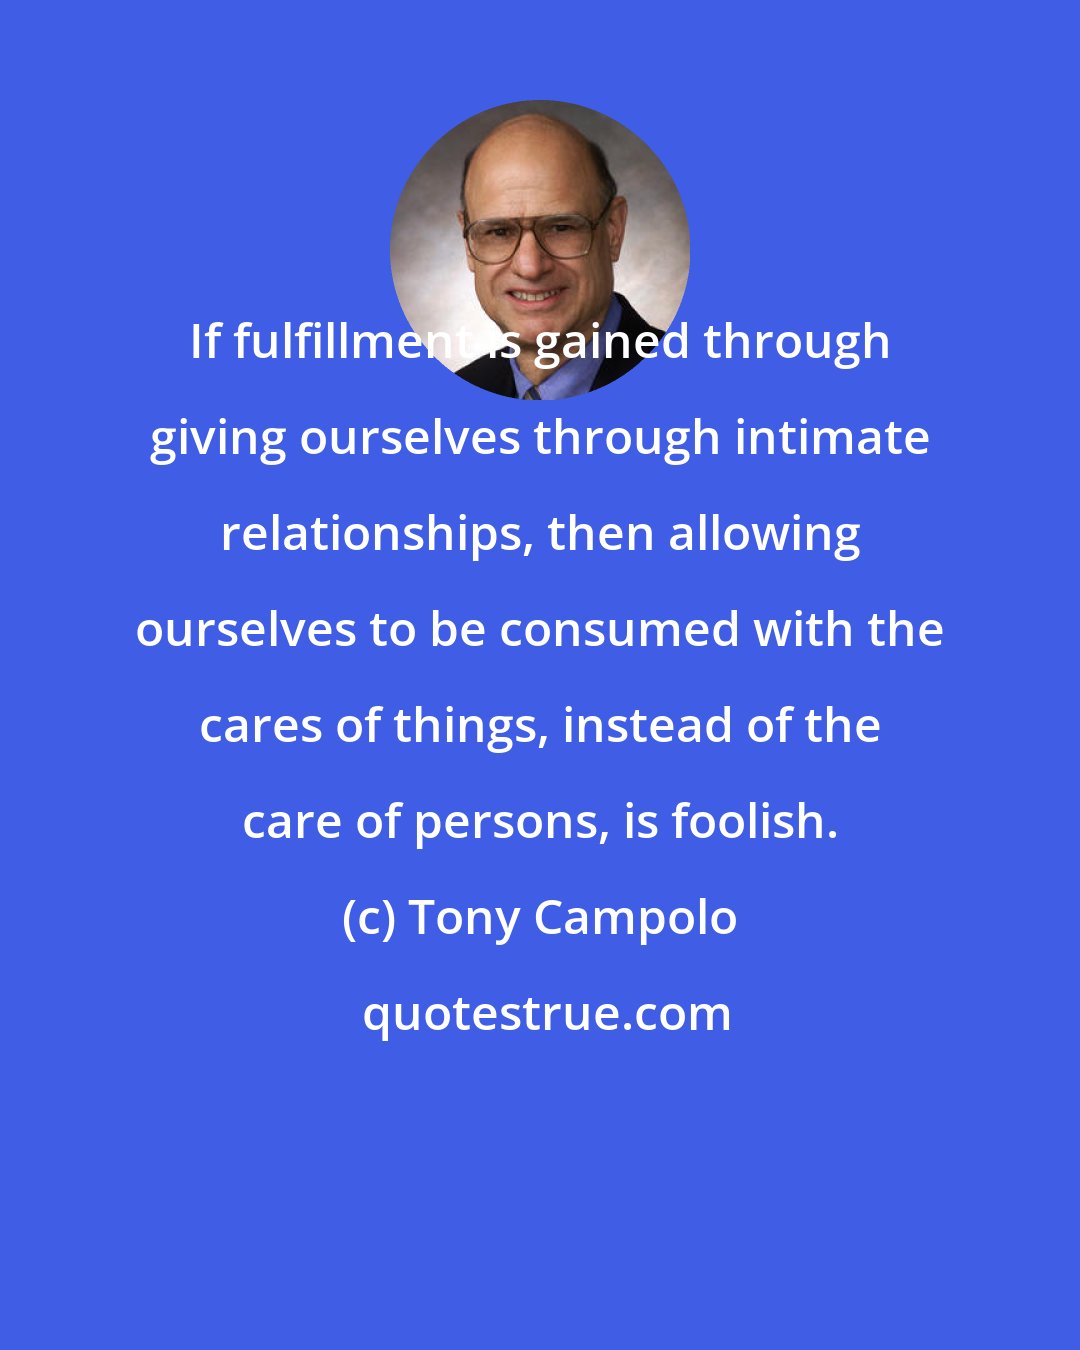 Tony Campolo: If fulfillment is gained through giving ourselves through intimate relationships, then allowing ourselves to be consumed with the cares of things, instead of the care of persons, is foolish.